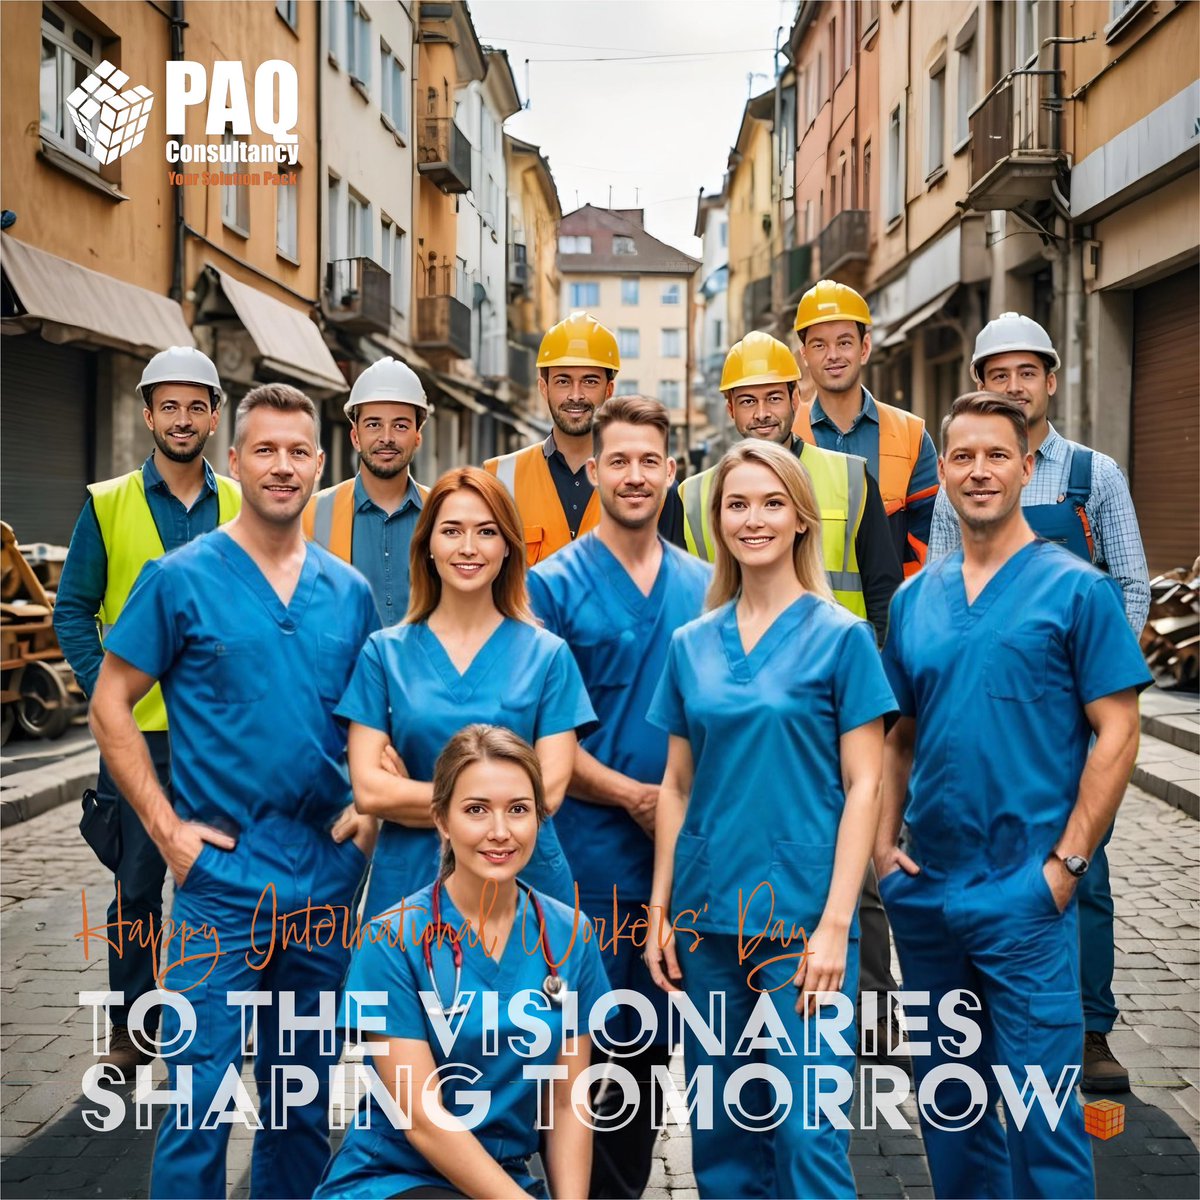 🛠️ Happy #InternationalWorkersDay from PAQ Consultancy! 🎉 Today, as we honor workers worldwide, let's reflect on the historic struggle for rights. Your dedication propels progress. Here's to a future where every worker is valued and empowered. #WorkersDay #PAQConsultancy